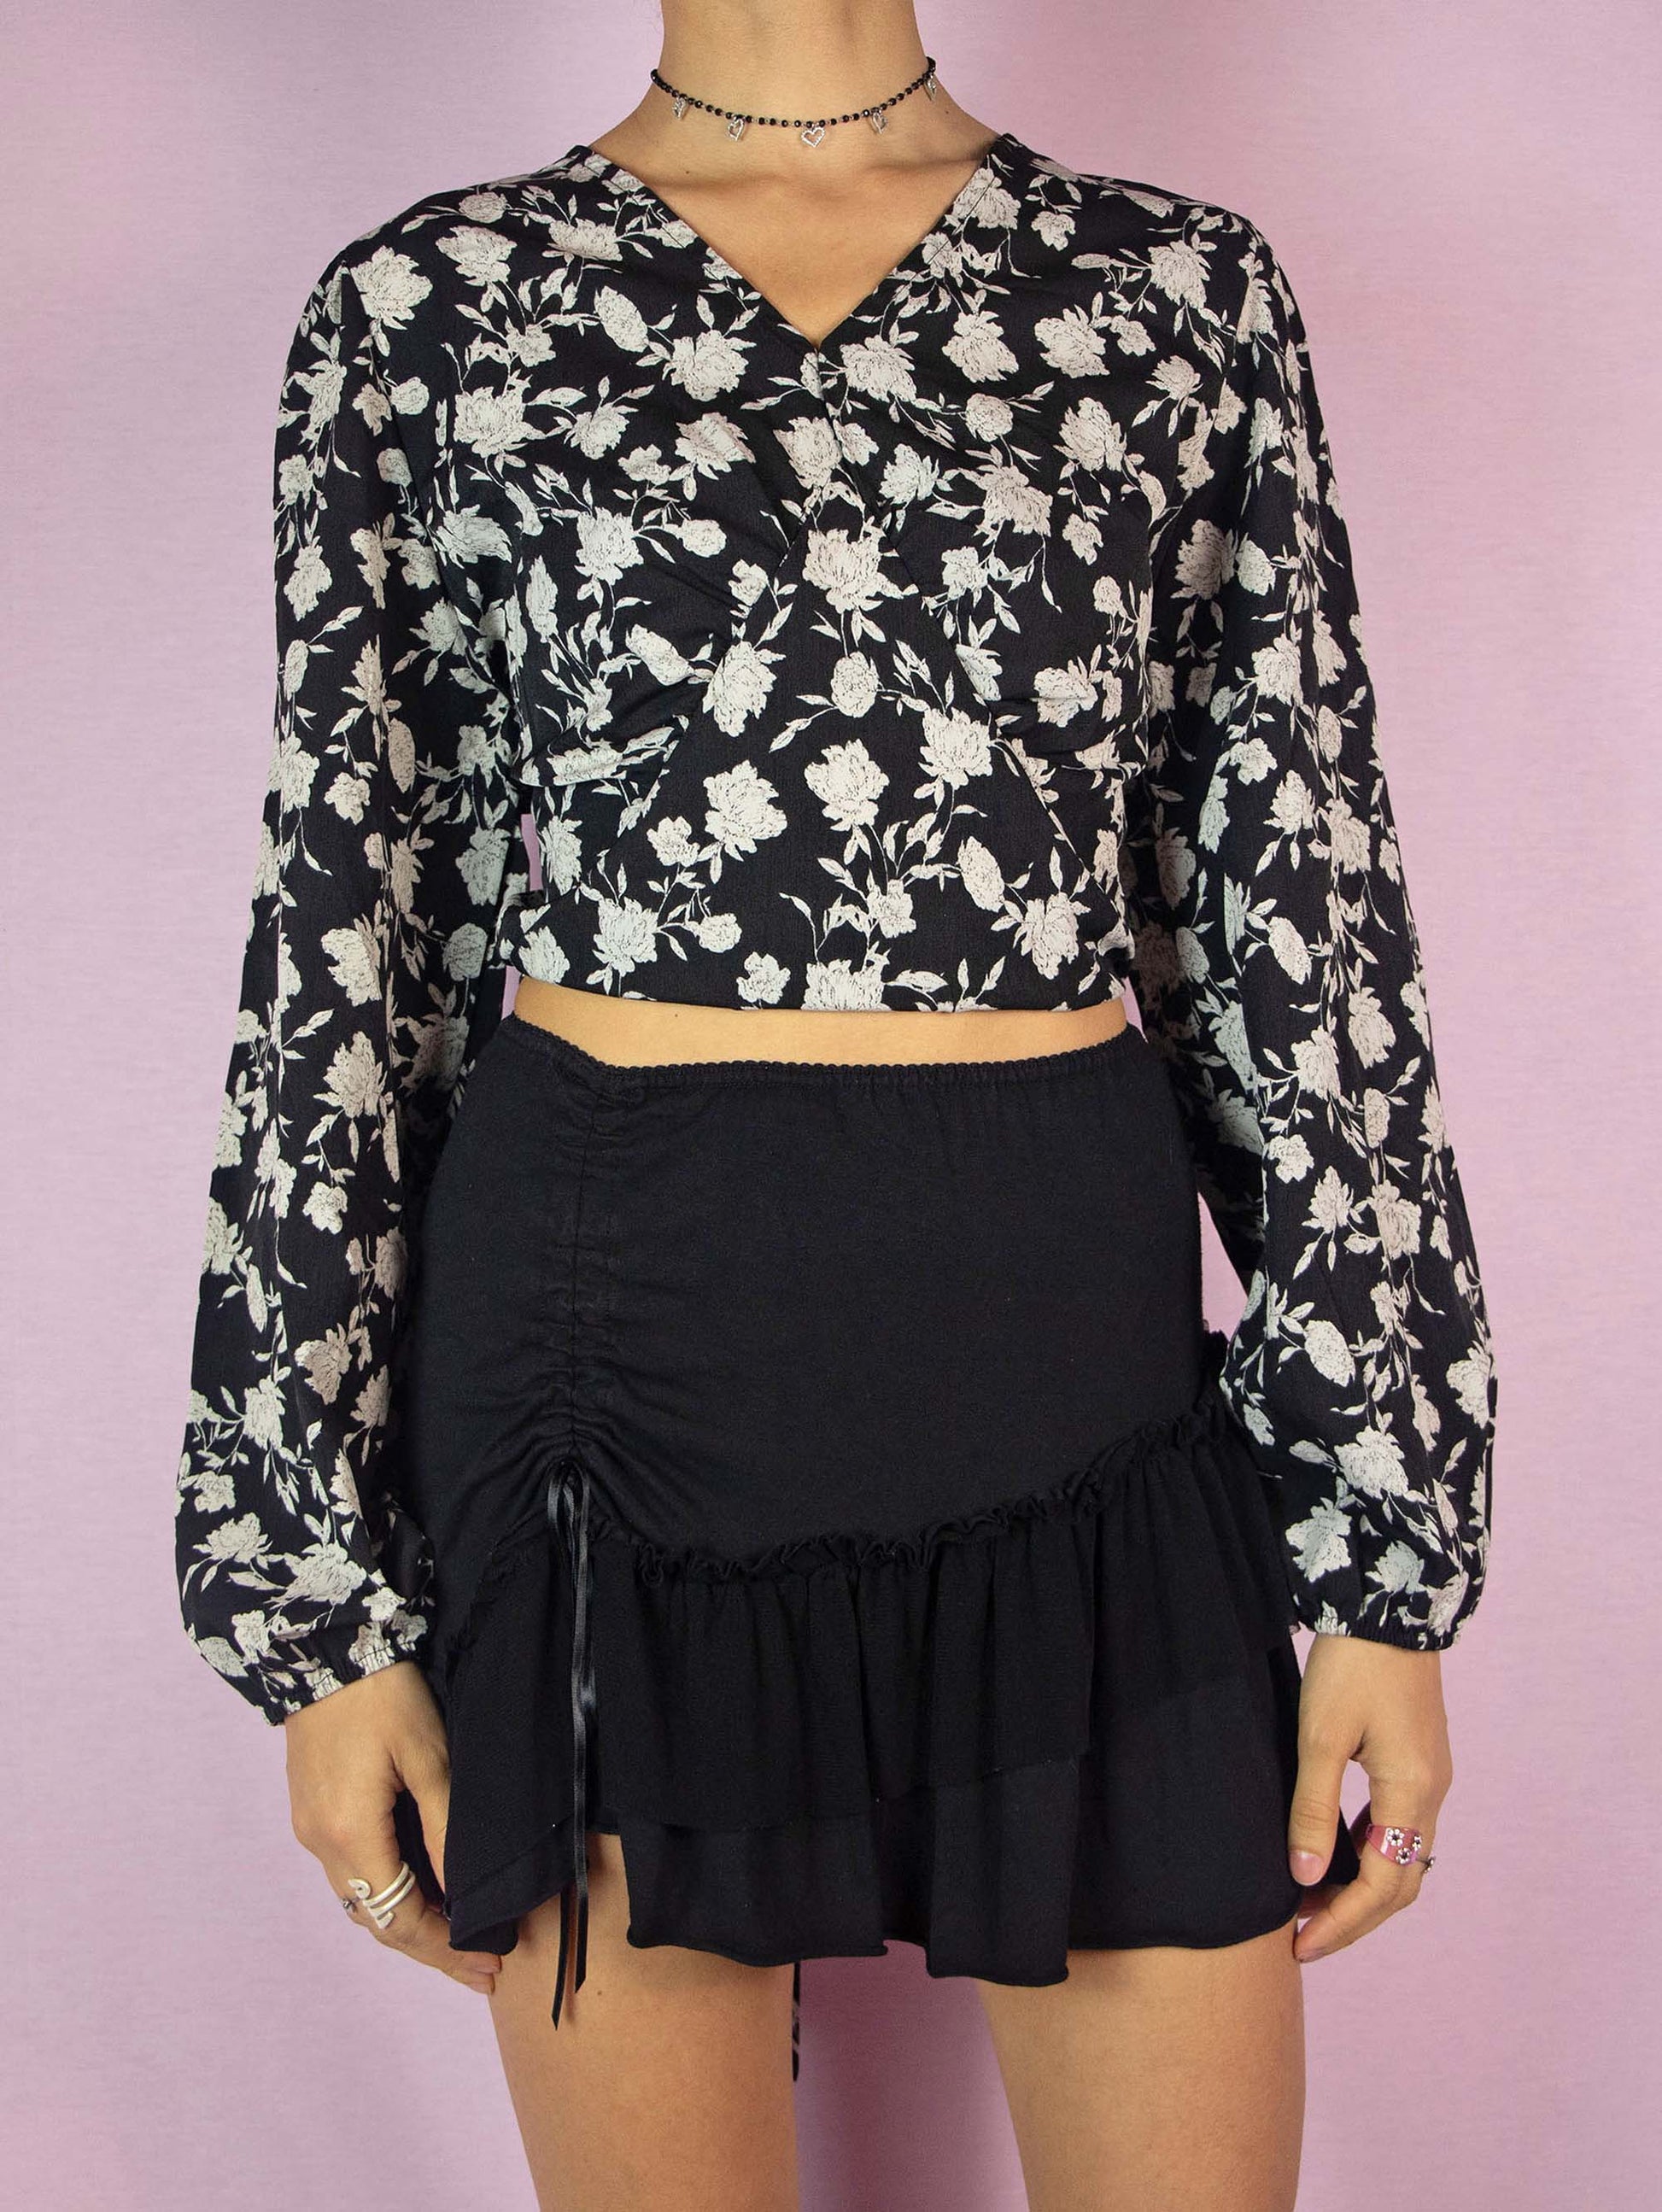 The Y2K Black Floral Tie Back Top is a vintage 2000s boho blouse with a floral graphic print, balloon sleeves, V-neckline, and elastic at the waist.